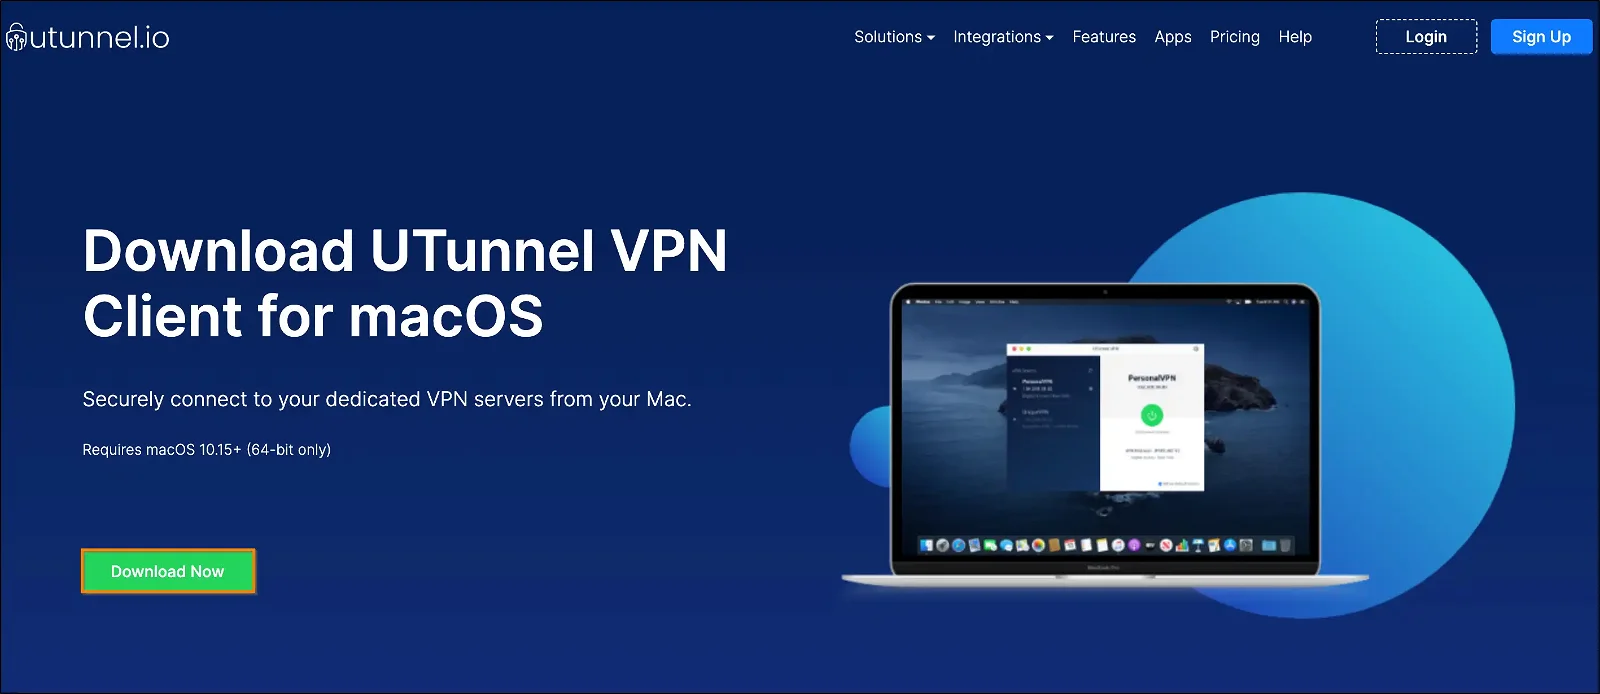 macos vpn client installation download page